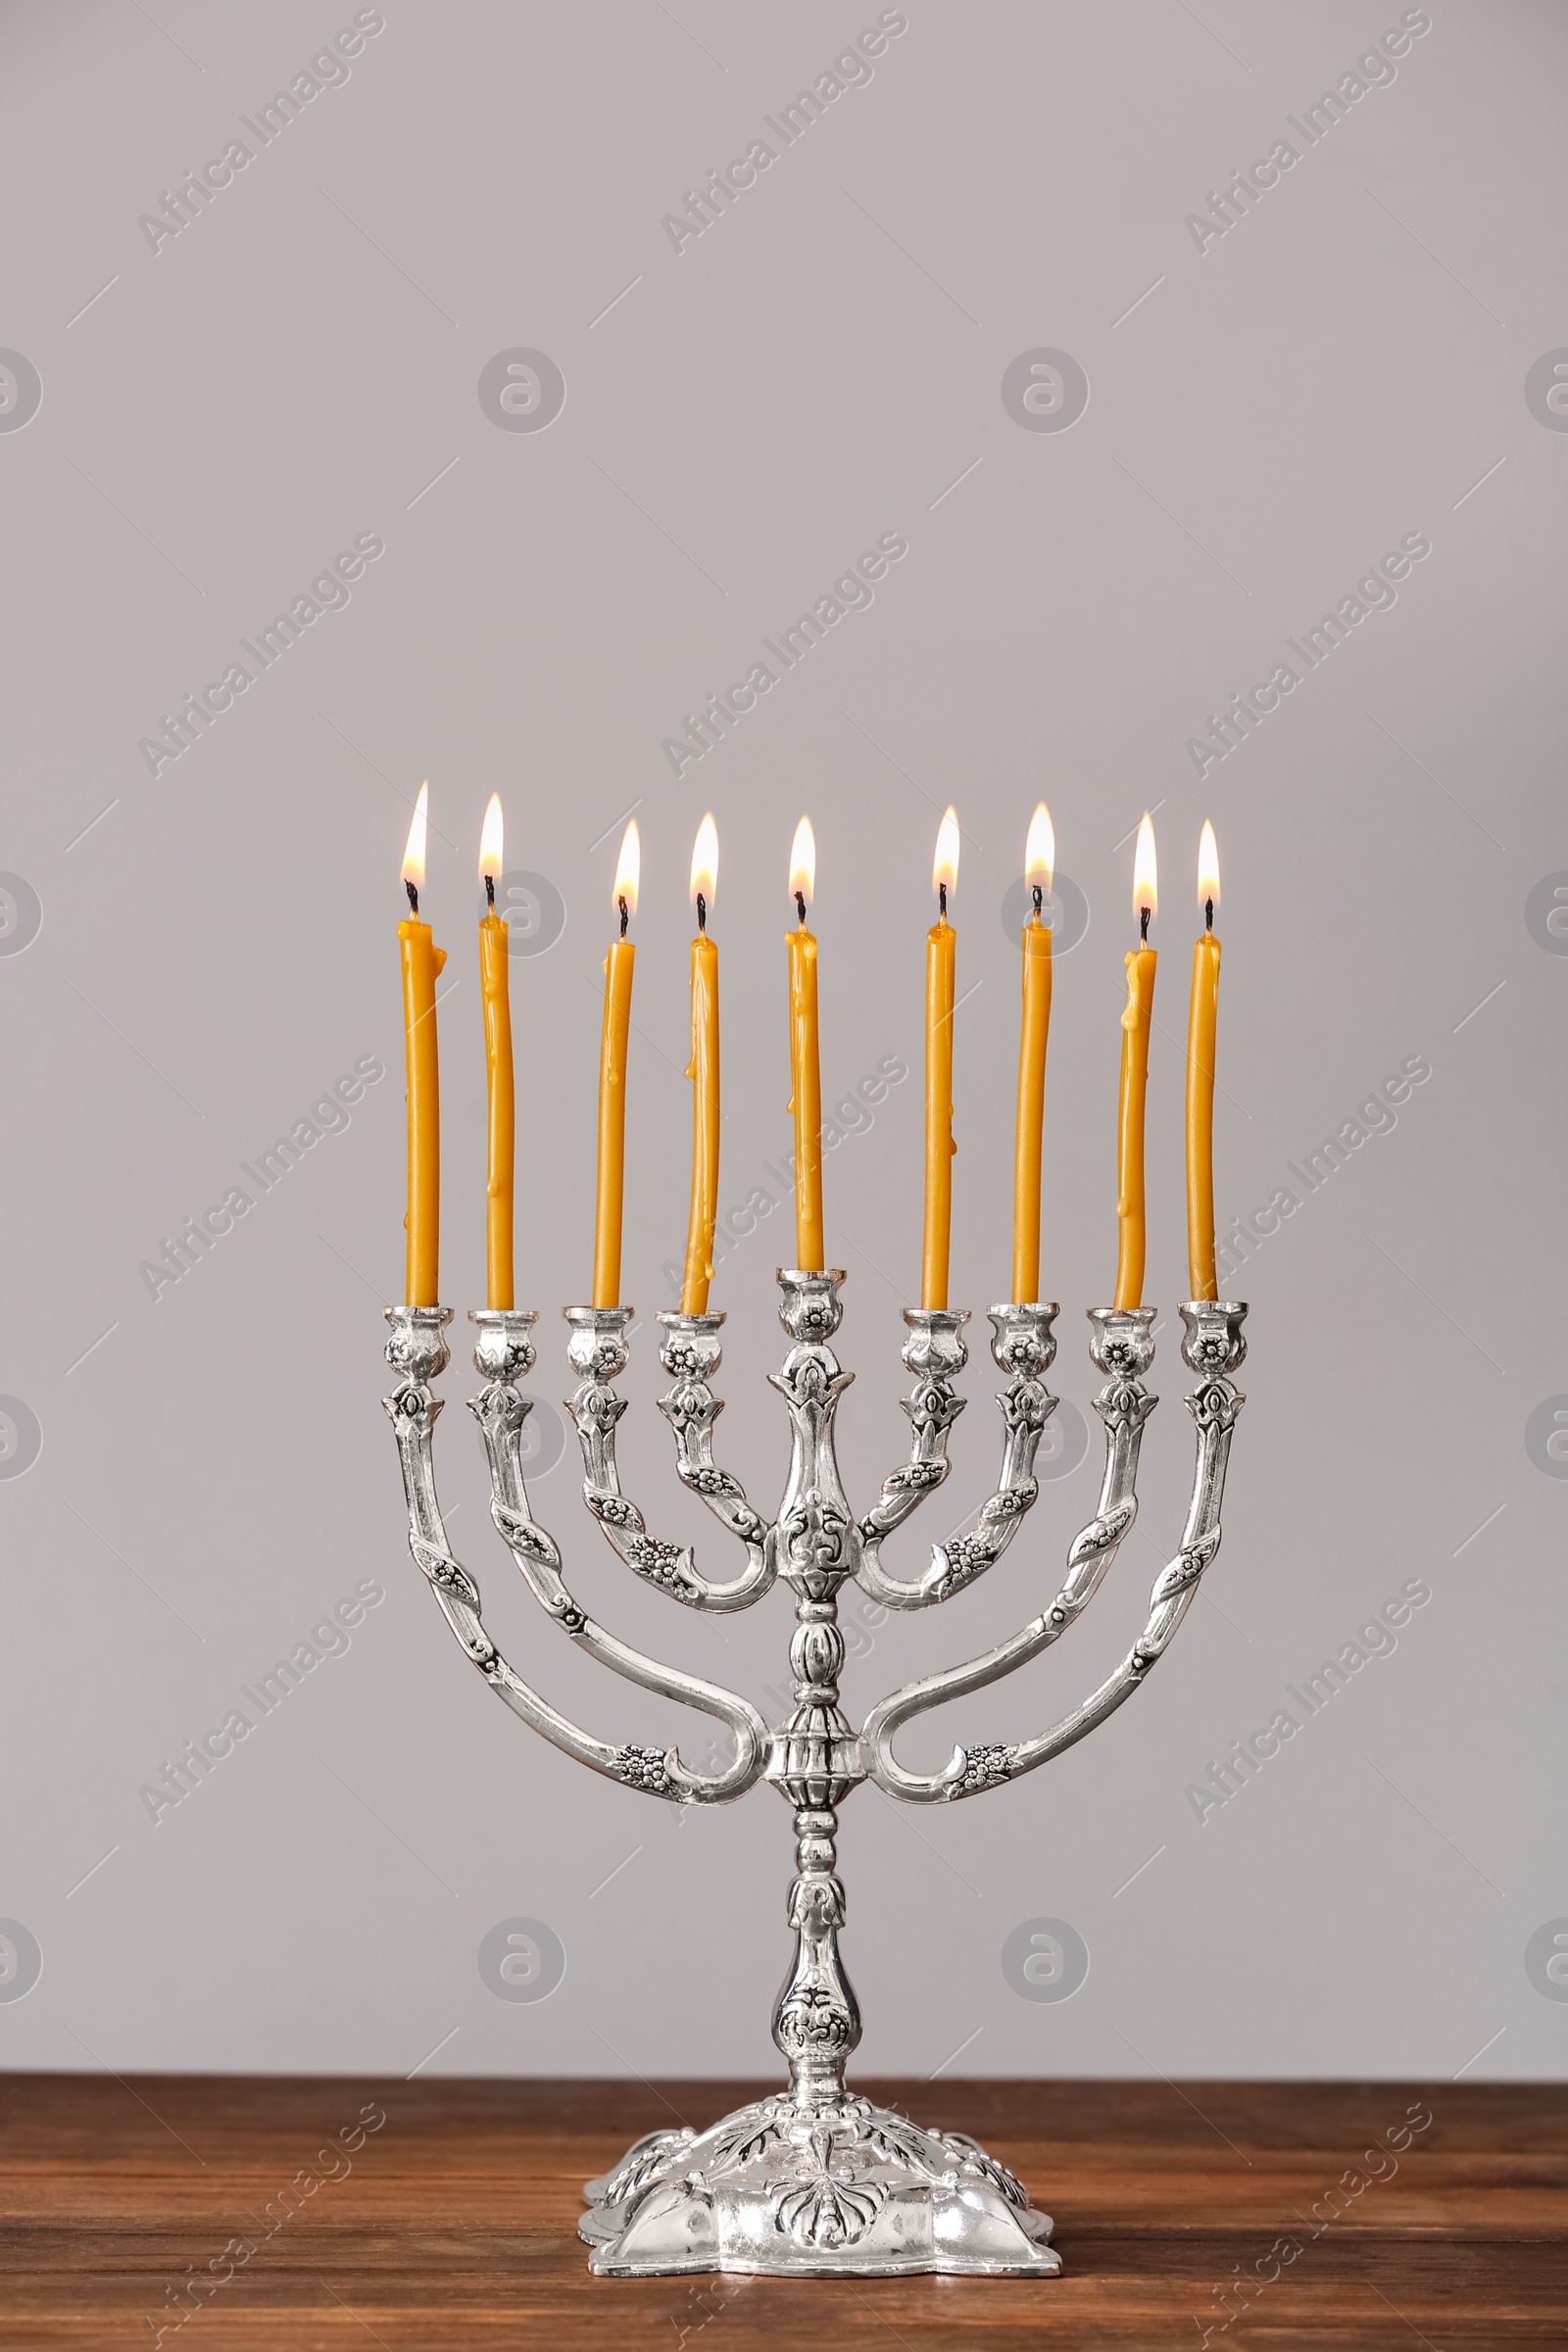 Photo of Silver menorah with burning candles on table against light grey background. Hanukkah celebration